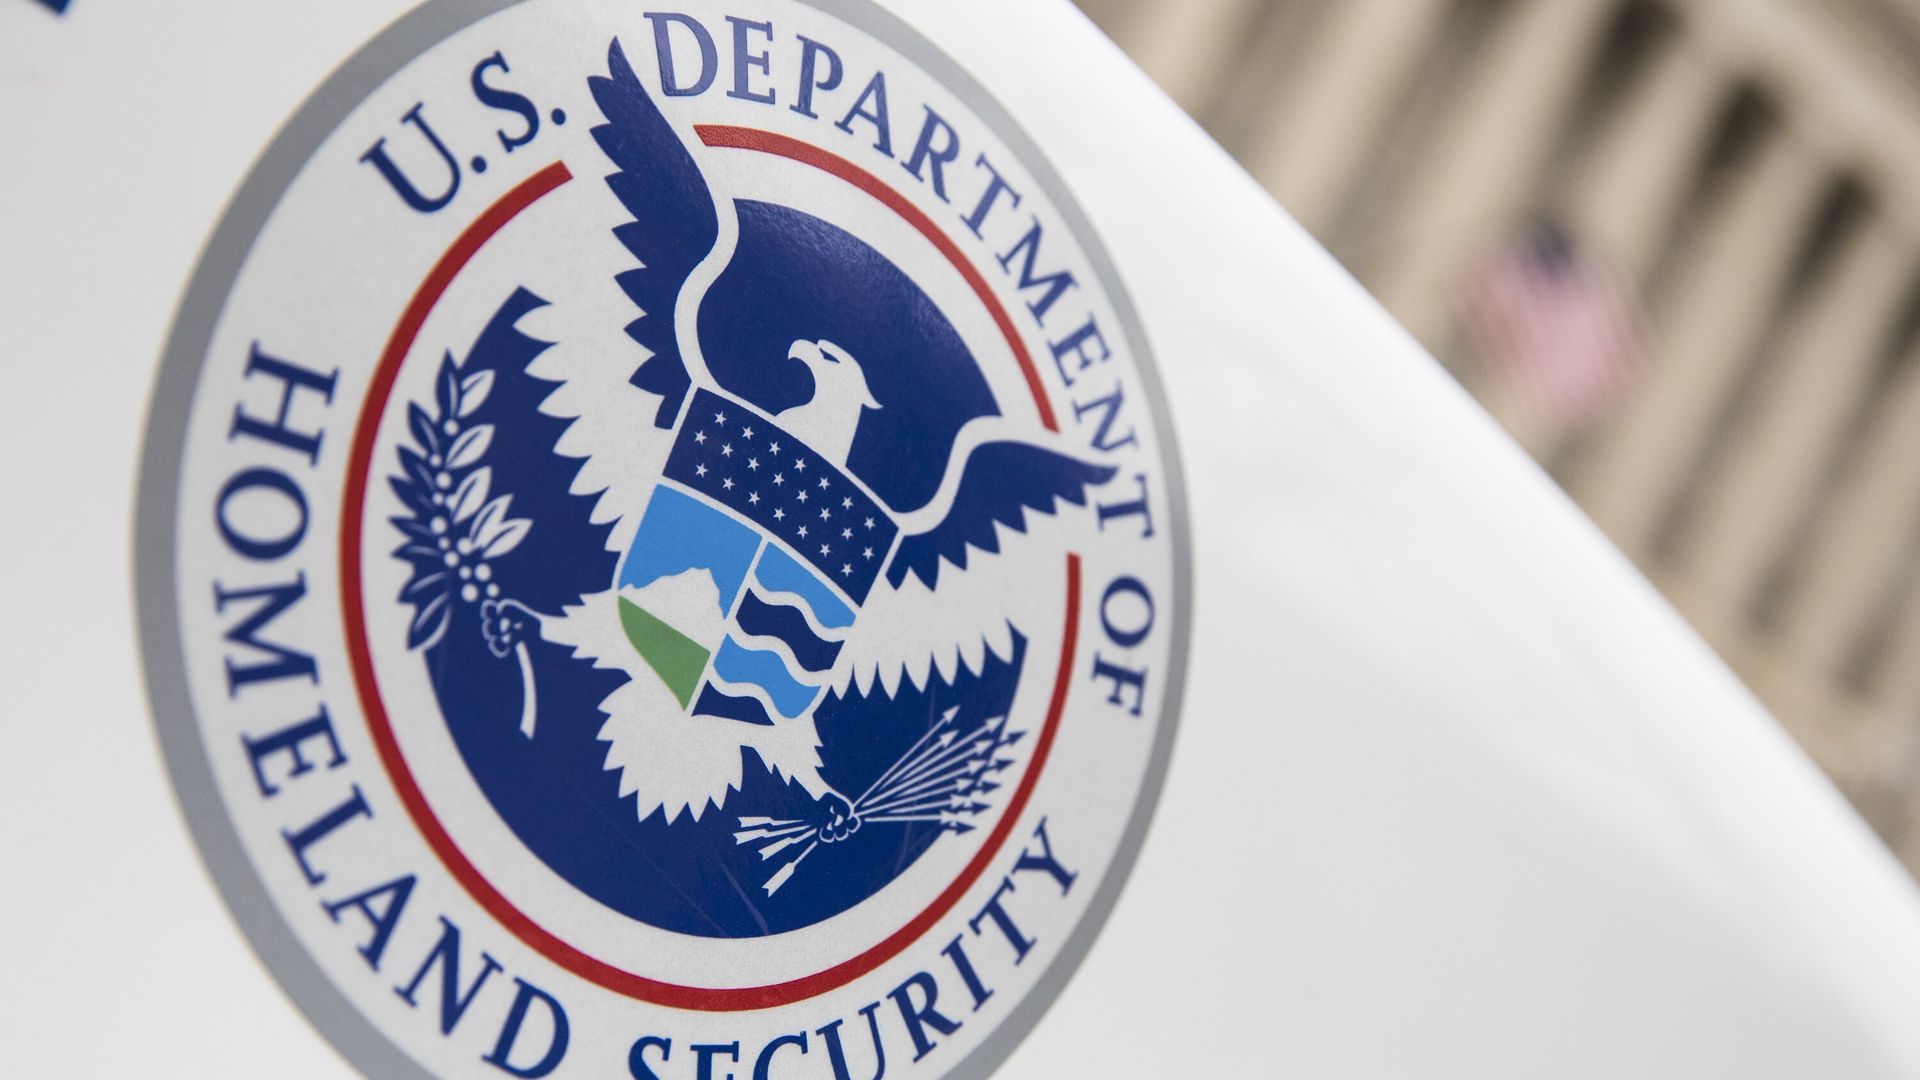 The Department of Homeland Security logo is seen on a law enforcement vehicle